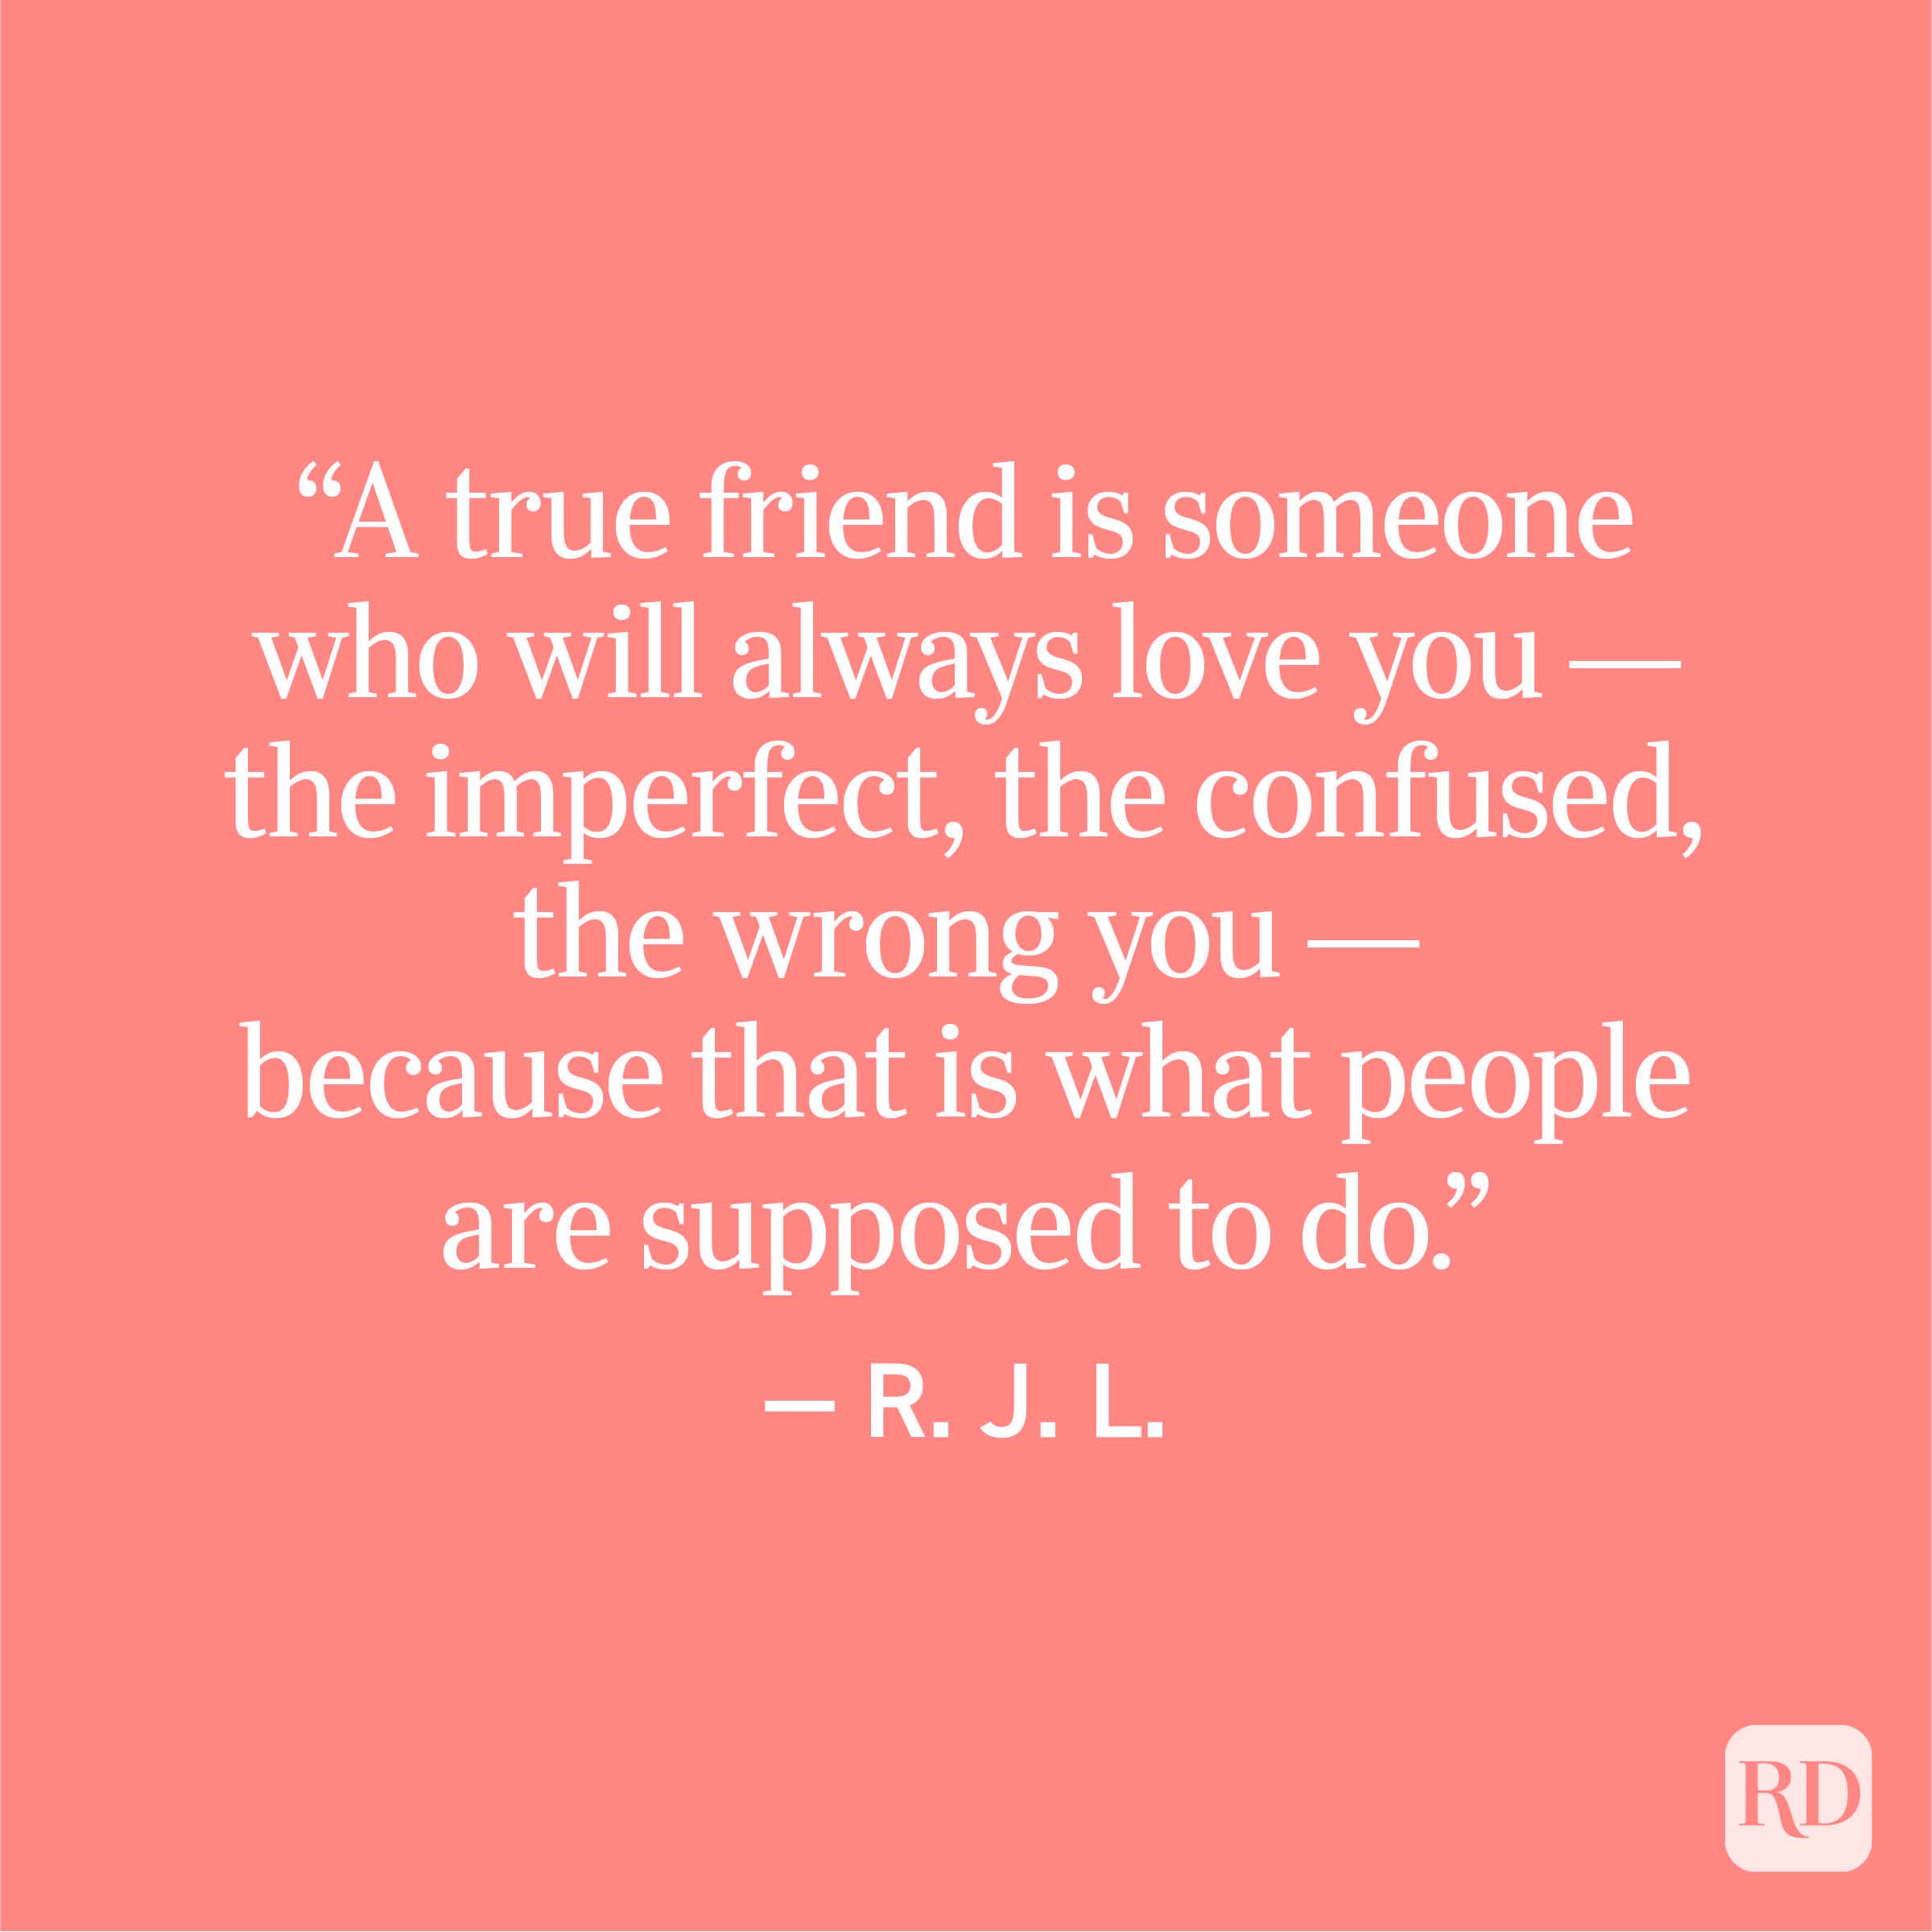 “A true friend is someone who will always love you — the imperfect, the confused, the wrong you — because that is what people are supposed to do.” — R. J. L.